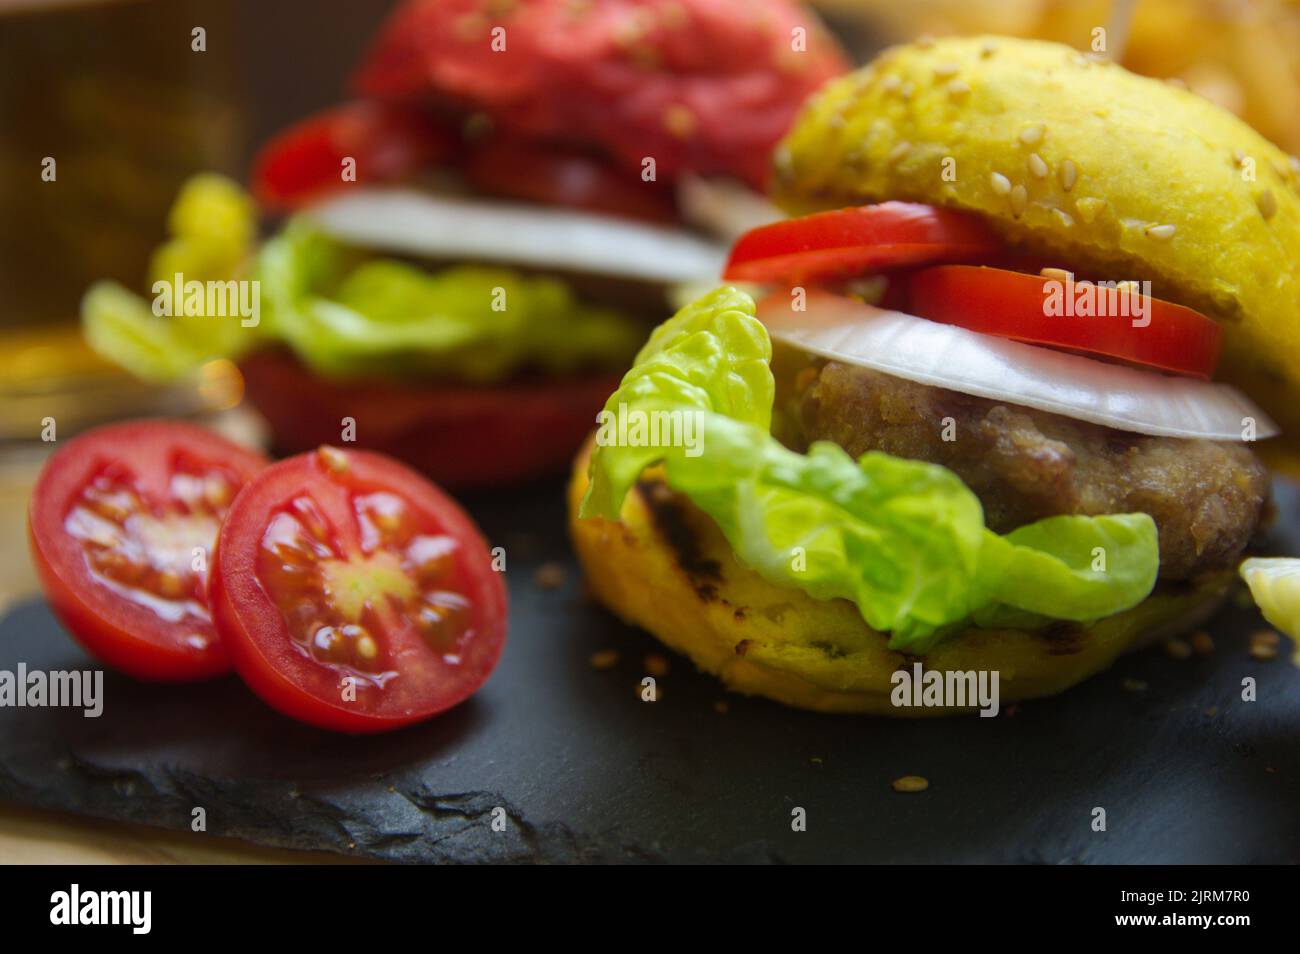 Closeup of hamburgers with tomato, onion rings and lettuce and loaves of red and yellow colors, all on a black slate table Stock Photo